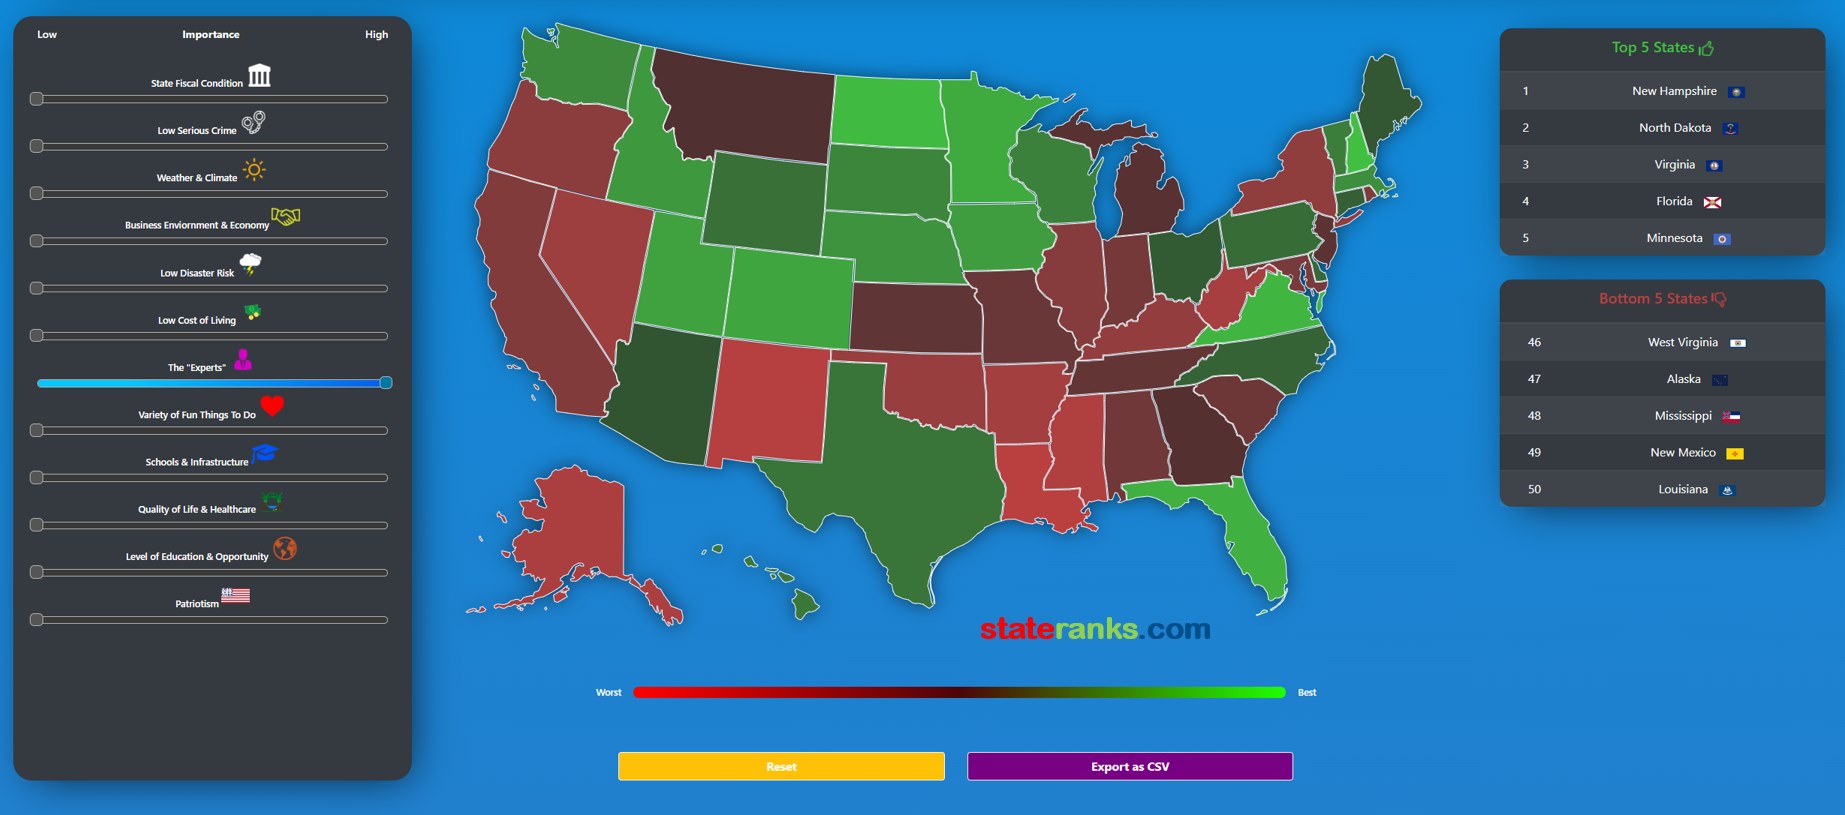 rank best states to live in or retire based on top expert ranking sources united states map 